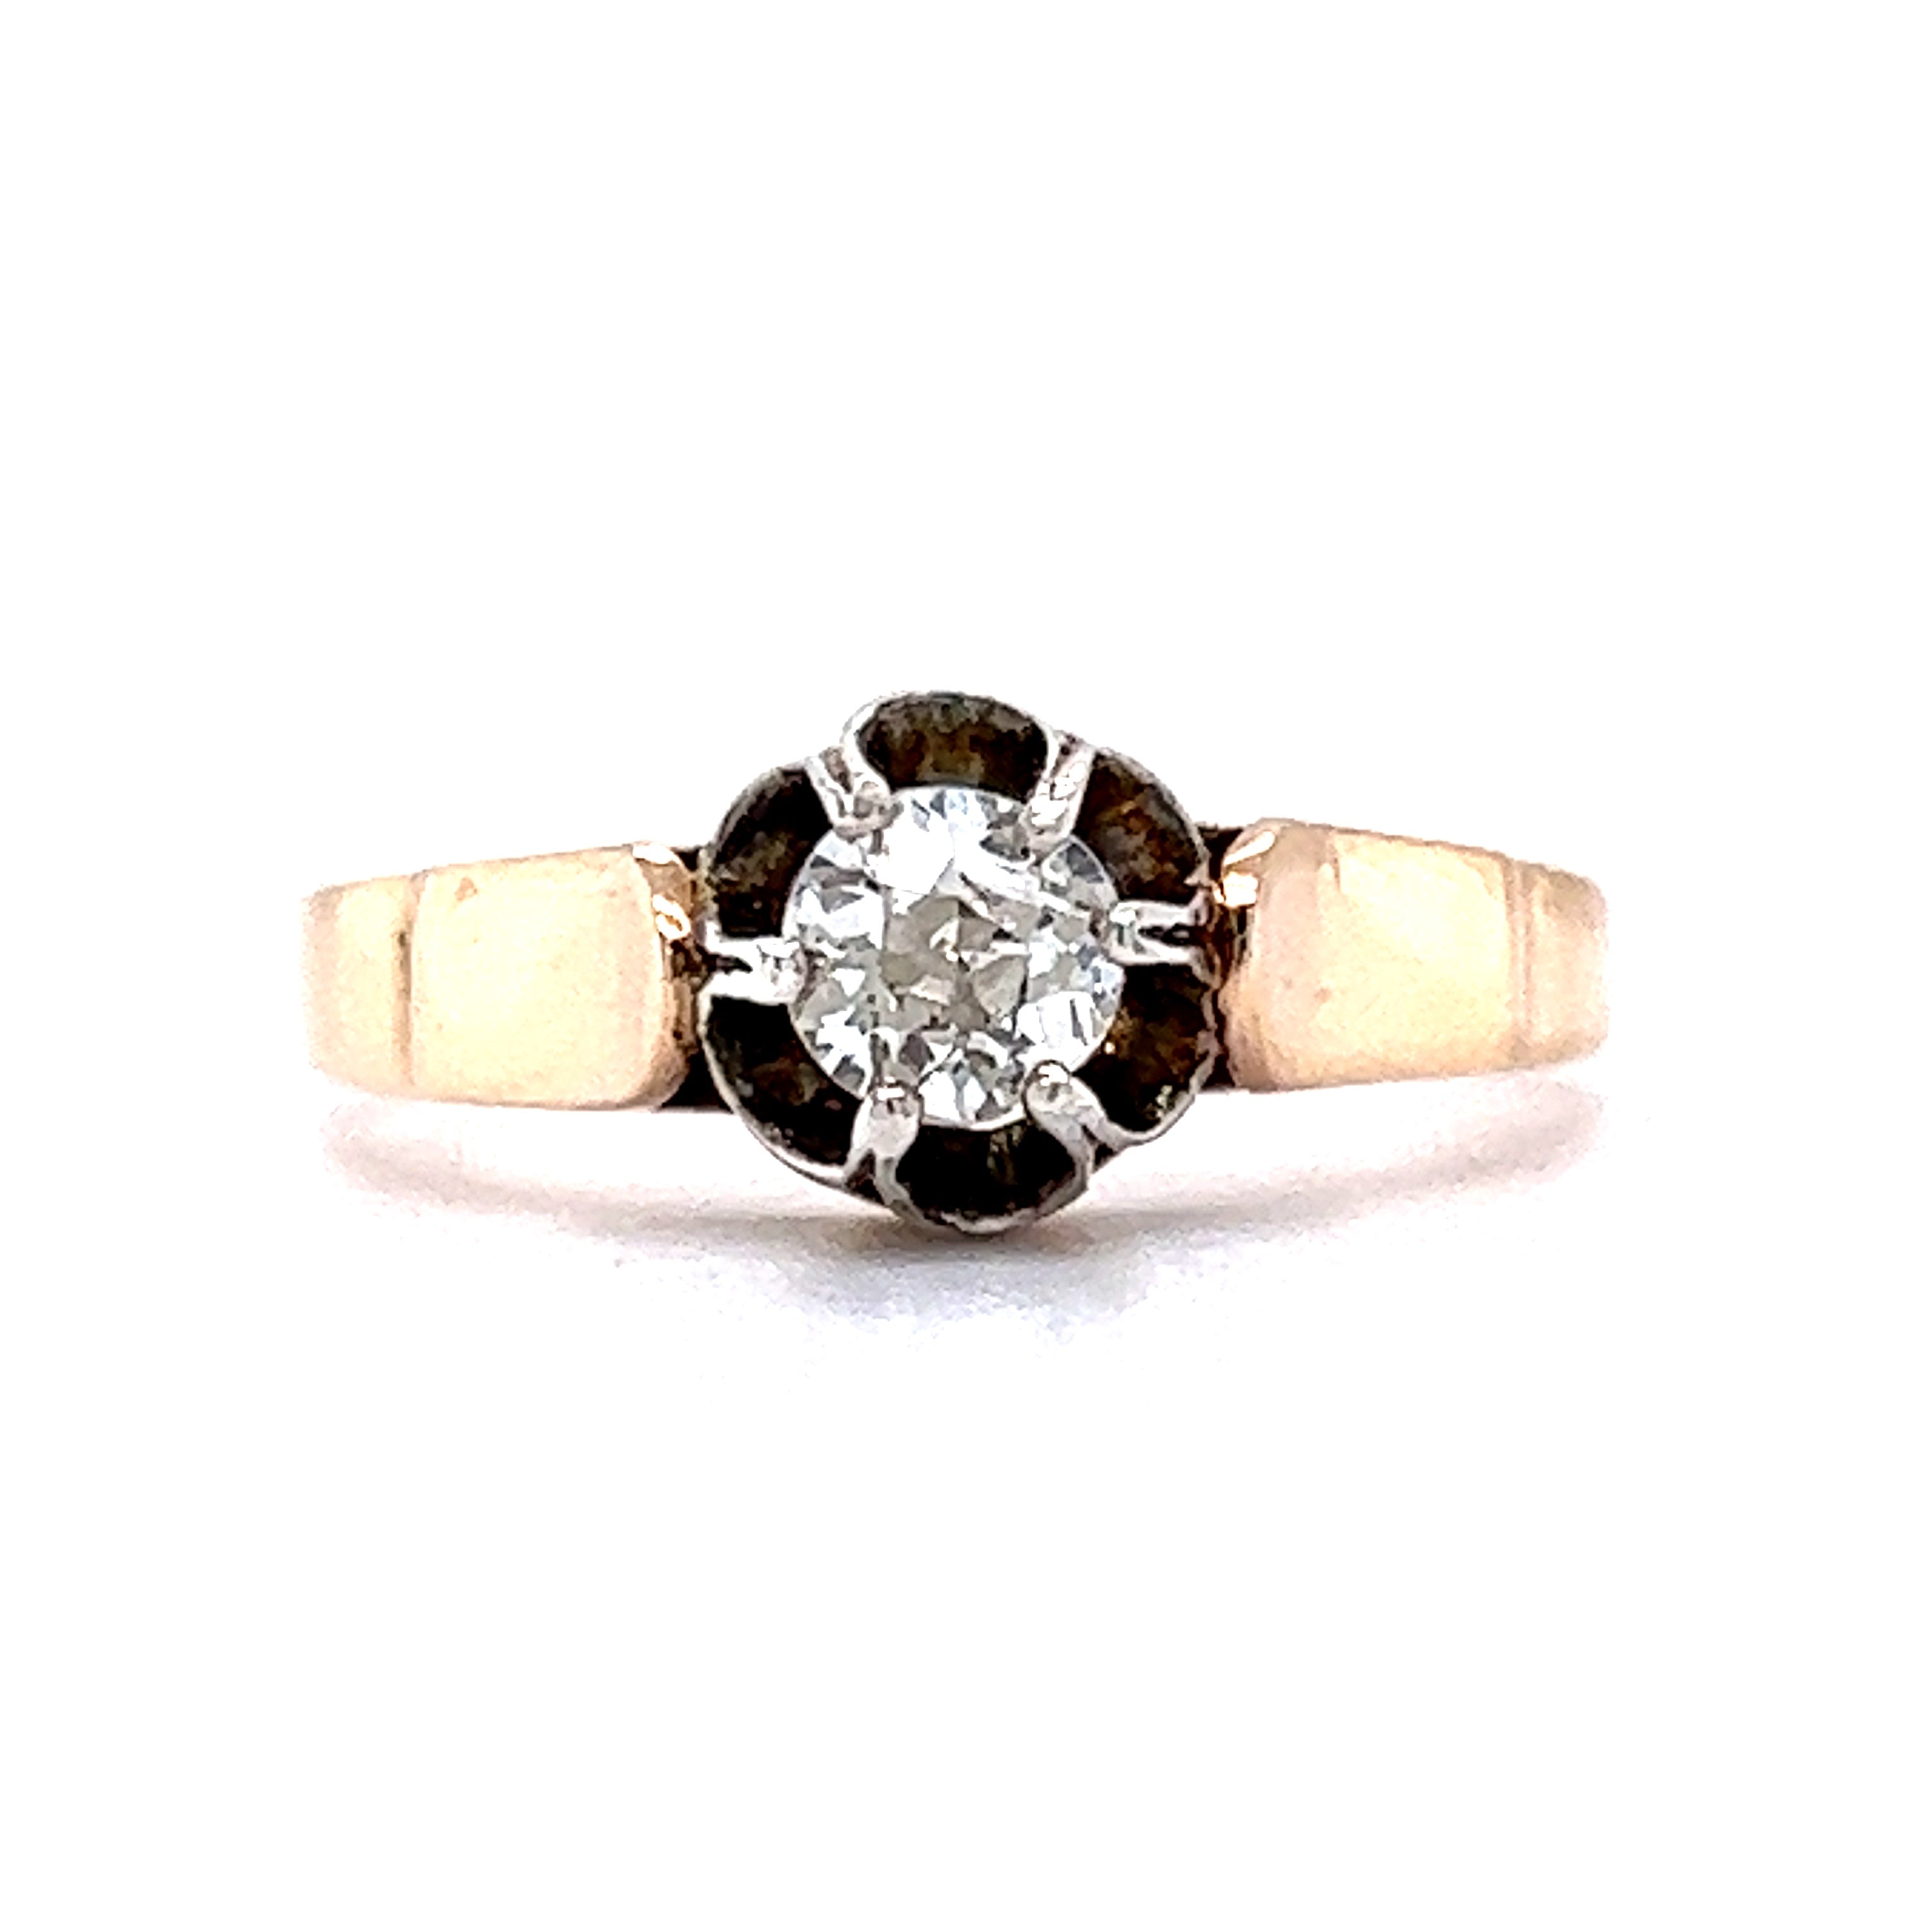 Victorian Old Mine Cut Diamond Solitaire Engagement Ring